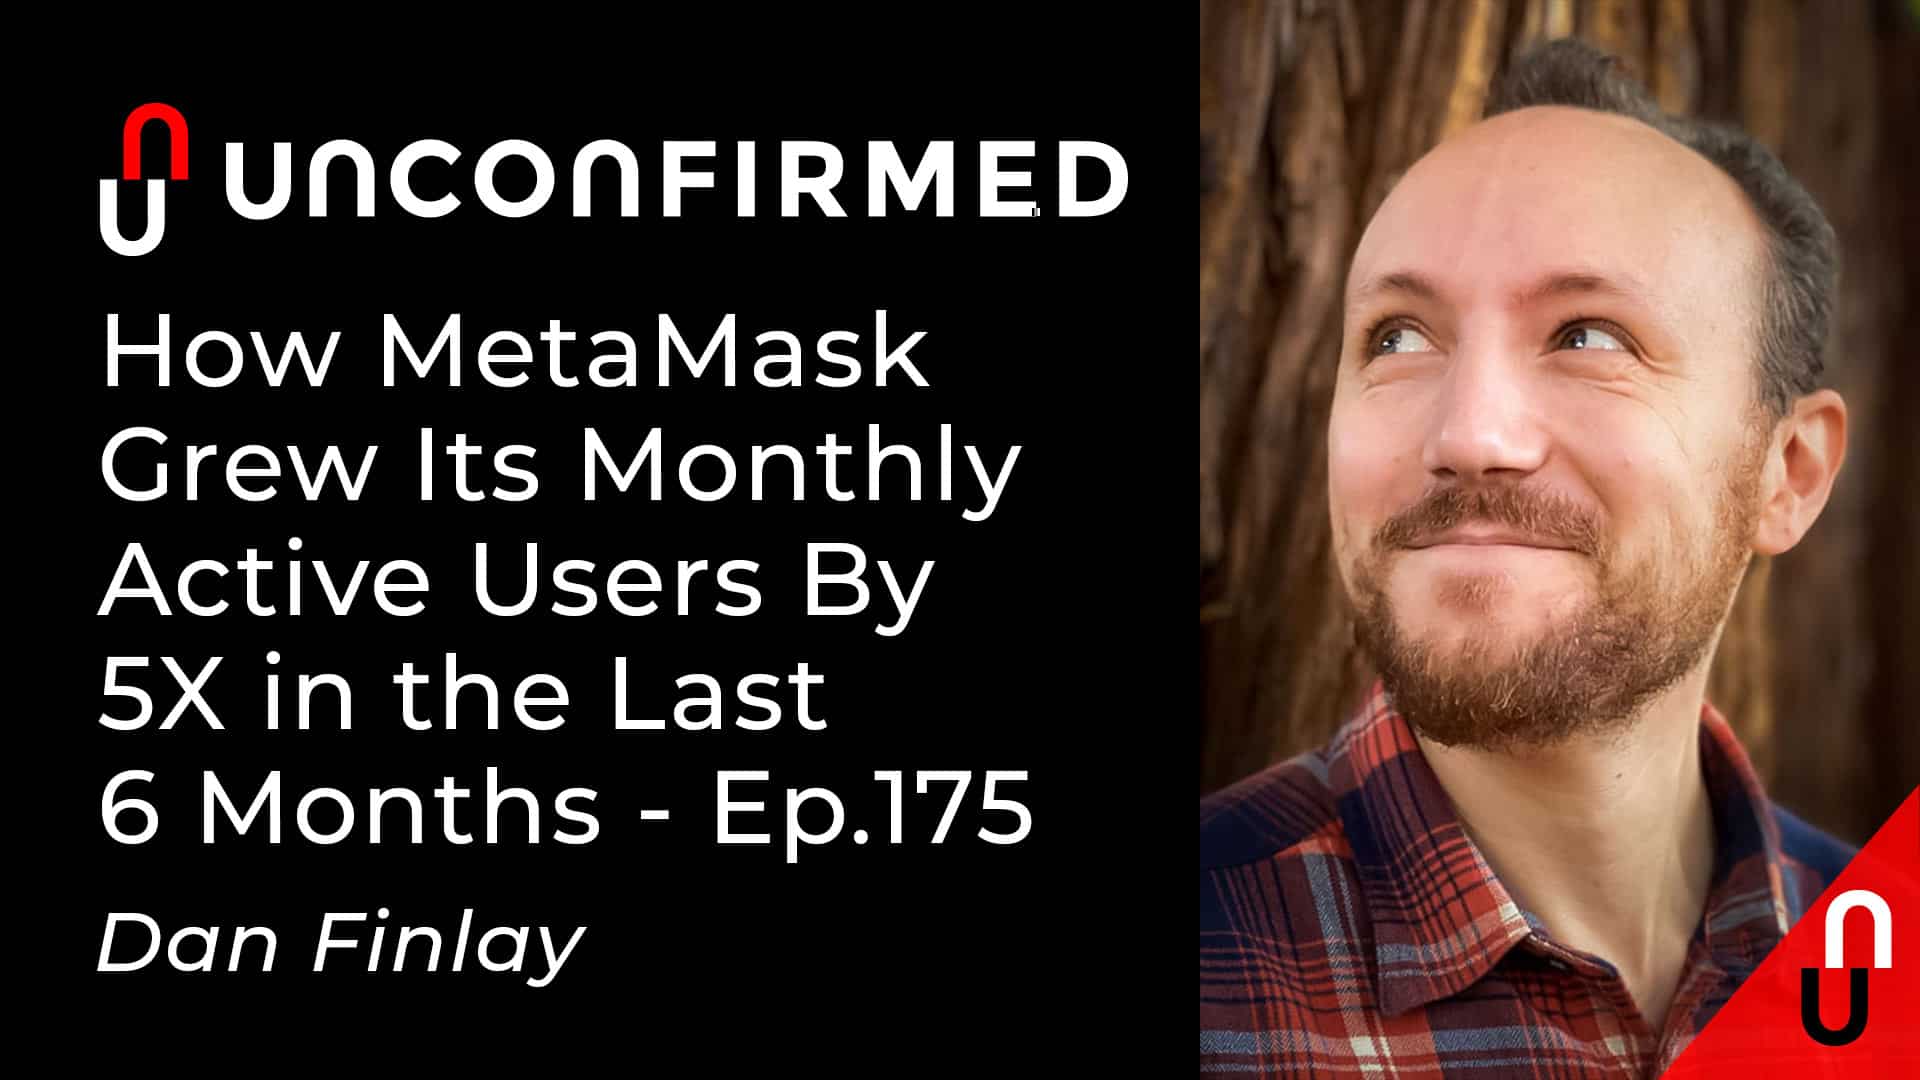 Unconfirmed - Ep.175 - How MetaMask Grew Its Monthly Active Users By 5X in the Last 6 Months